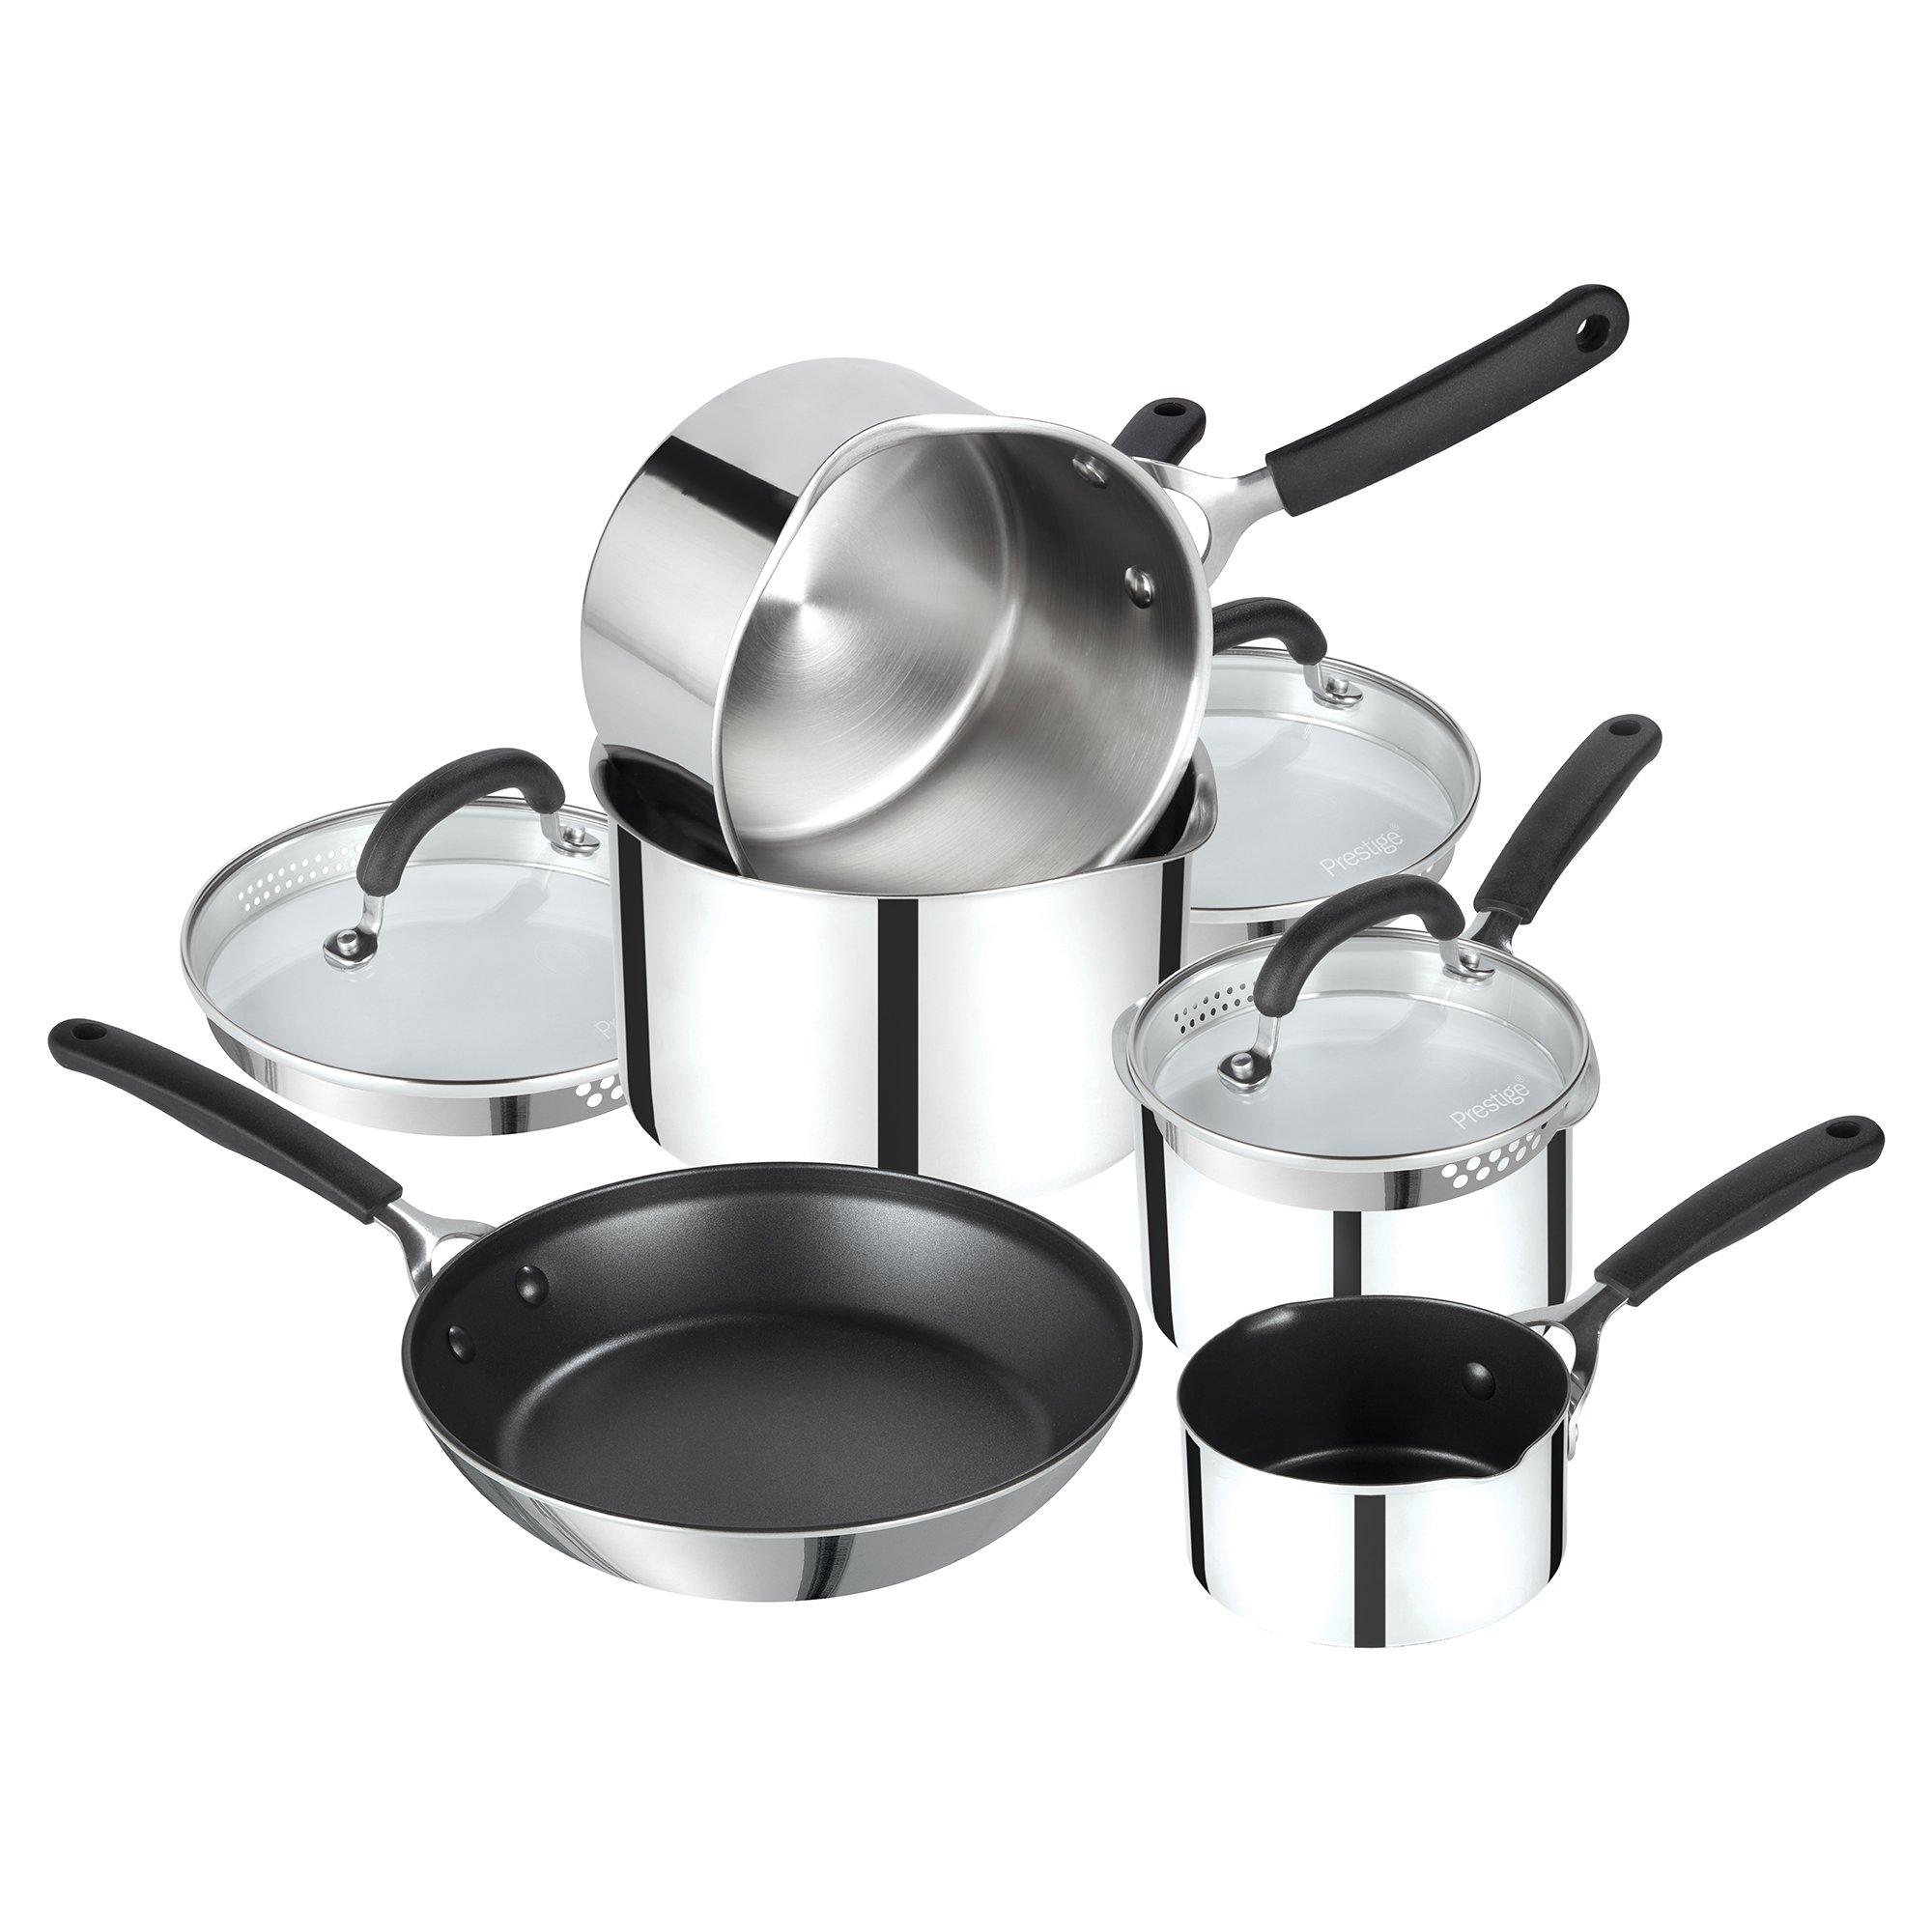 5 Pack 'Made to Last' Includes Double Side Straining Lids Cookware Set